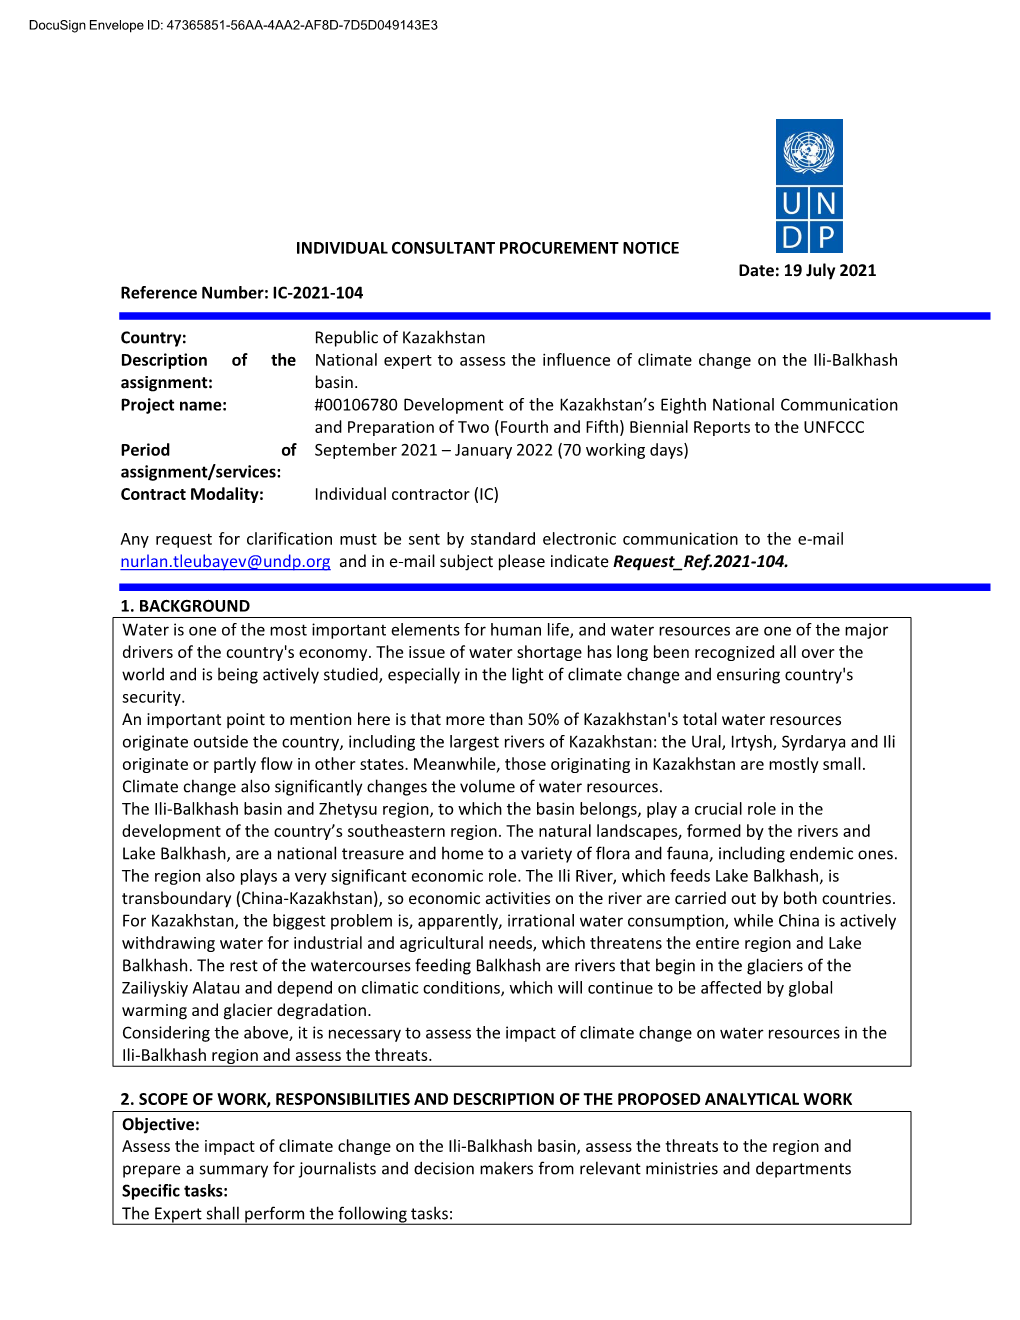 INDIVIDUAL CONSULTANT PROCUREMENT NOTICE Date: 19 July 2021 Reference Number: IC-2021-104